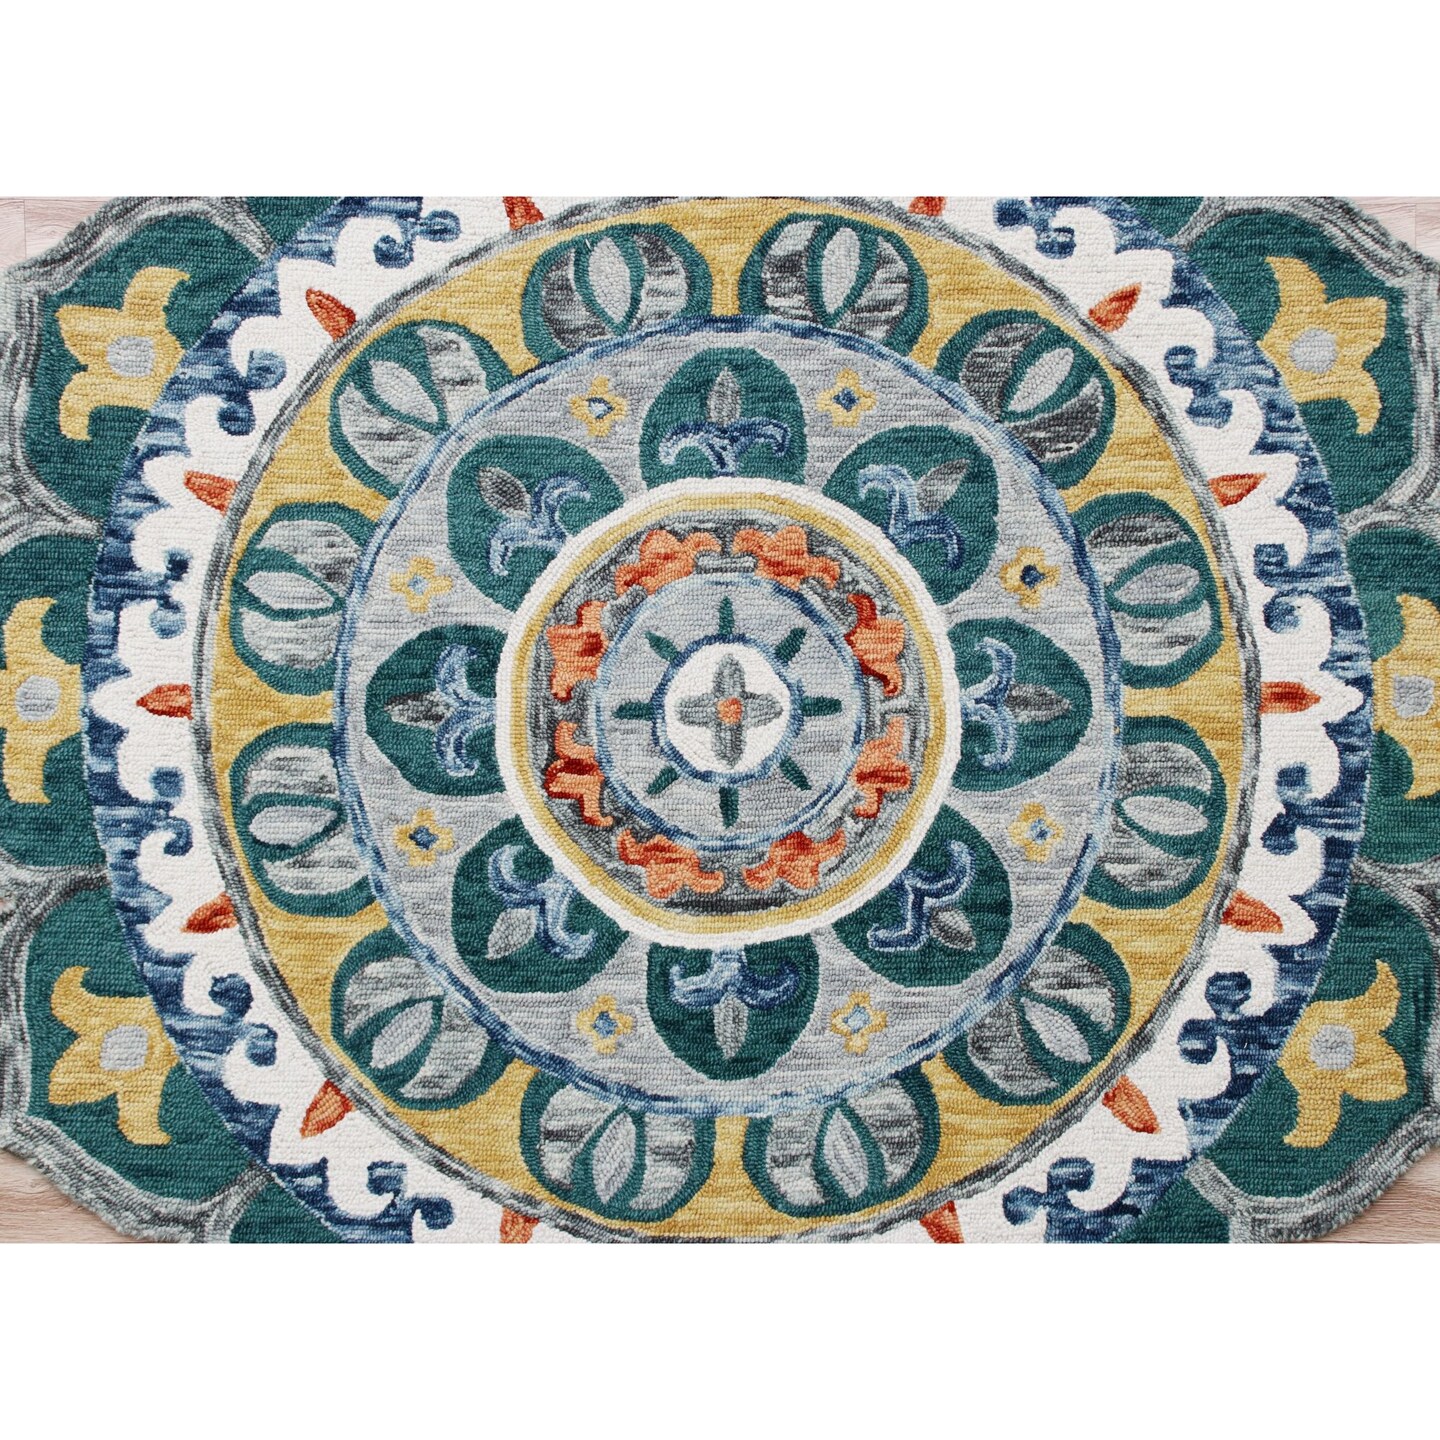 Laddha Home Designs 4' Teal Blue and Yellow Hand Hooked Mandala Medallion  Round Wool Area Throw Rug